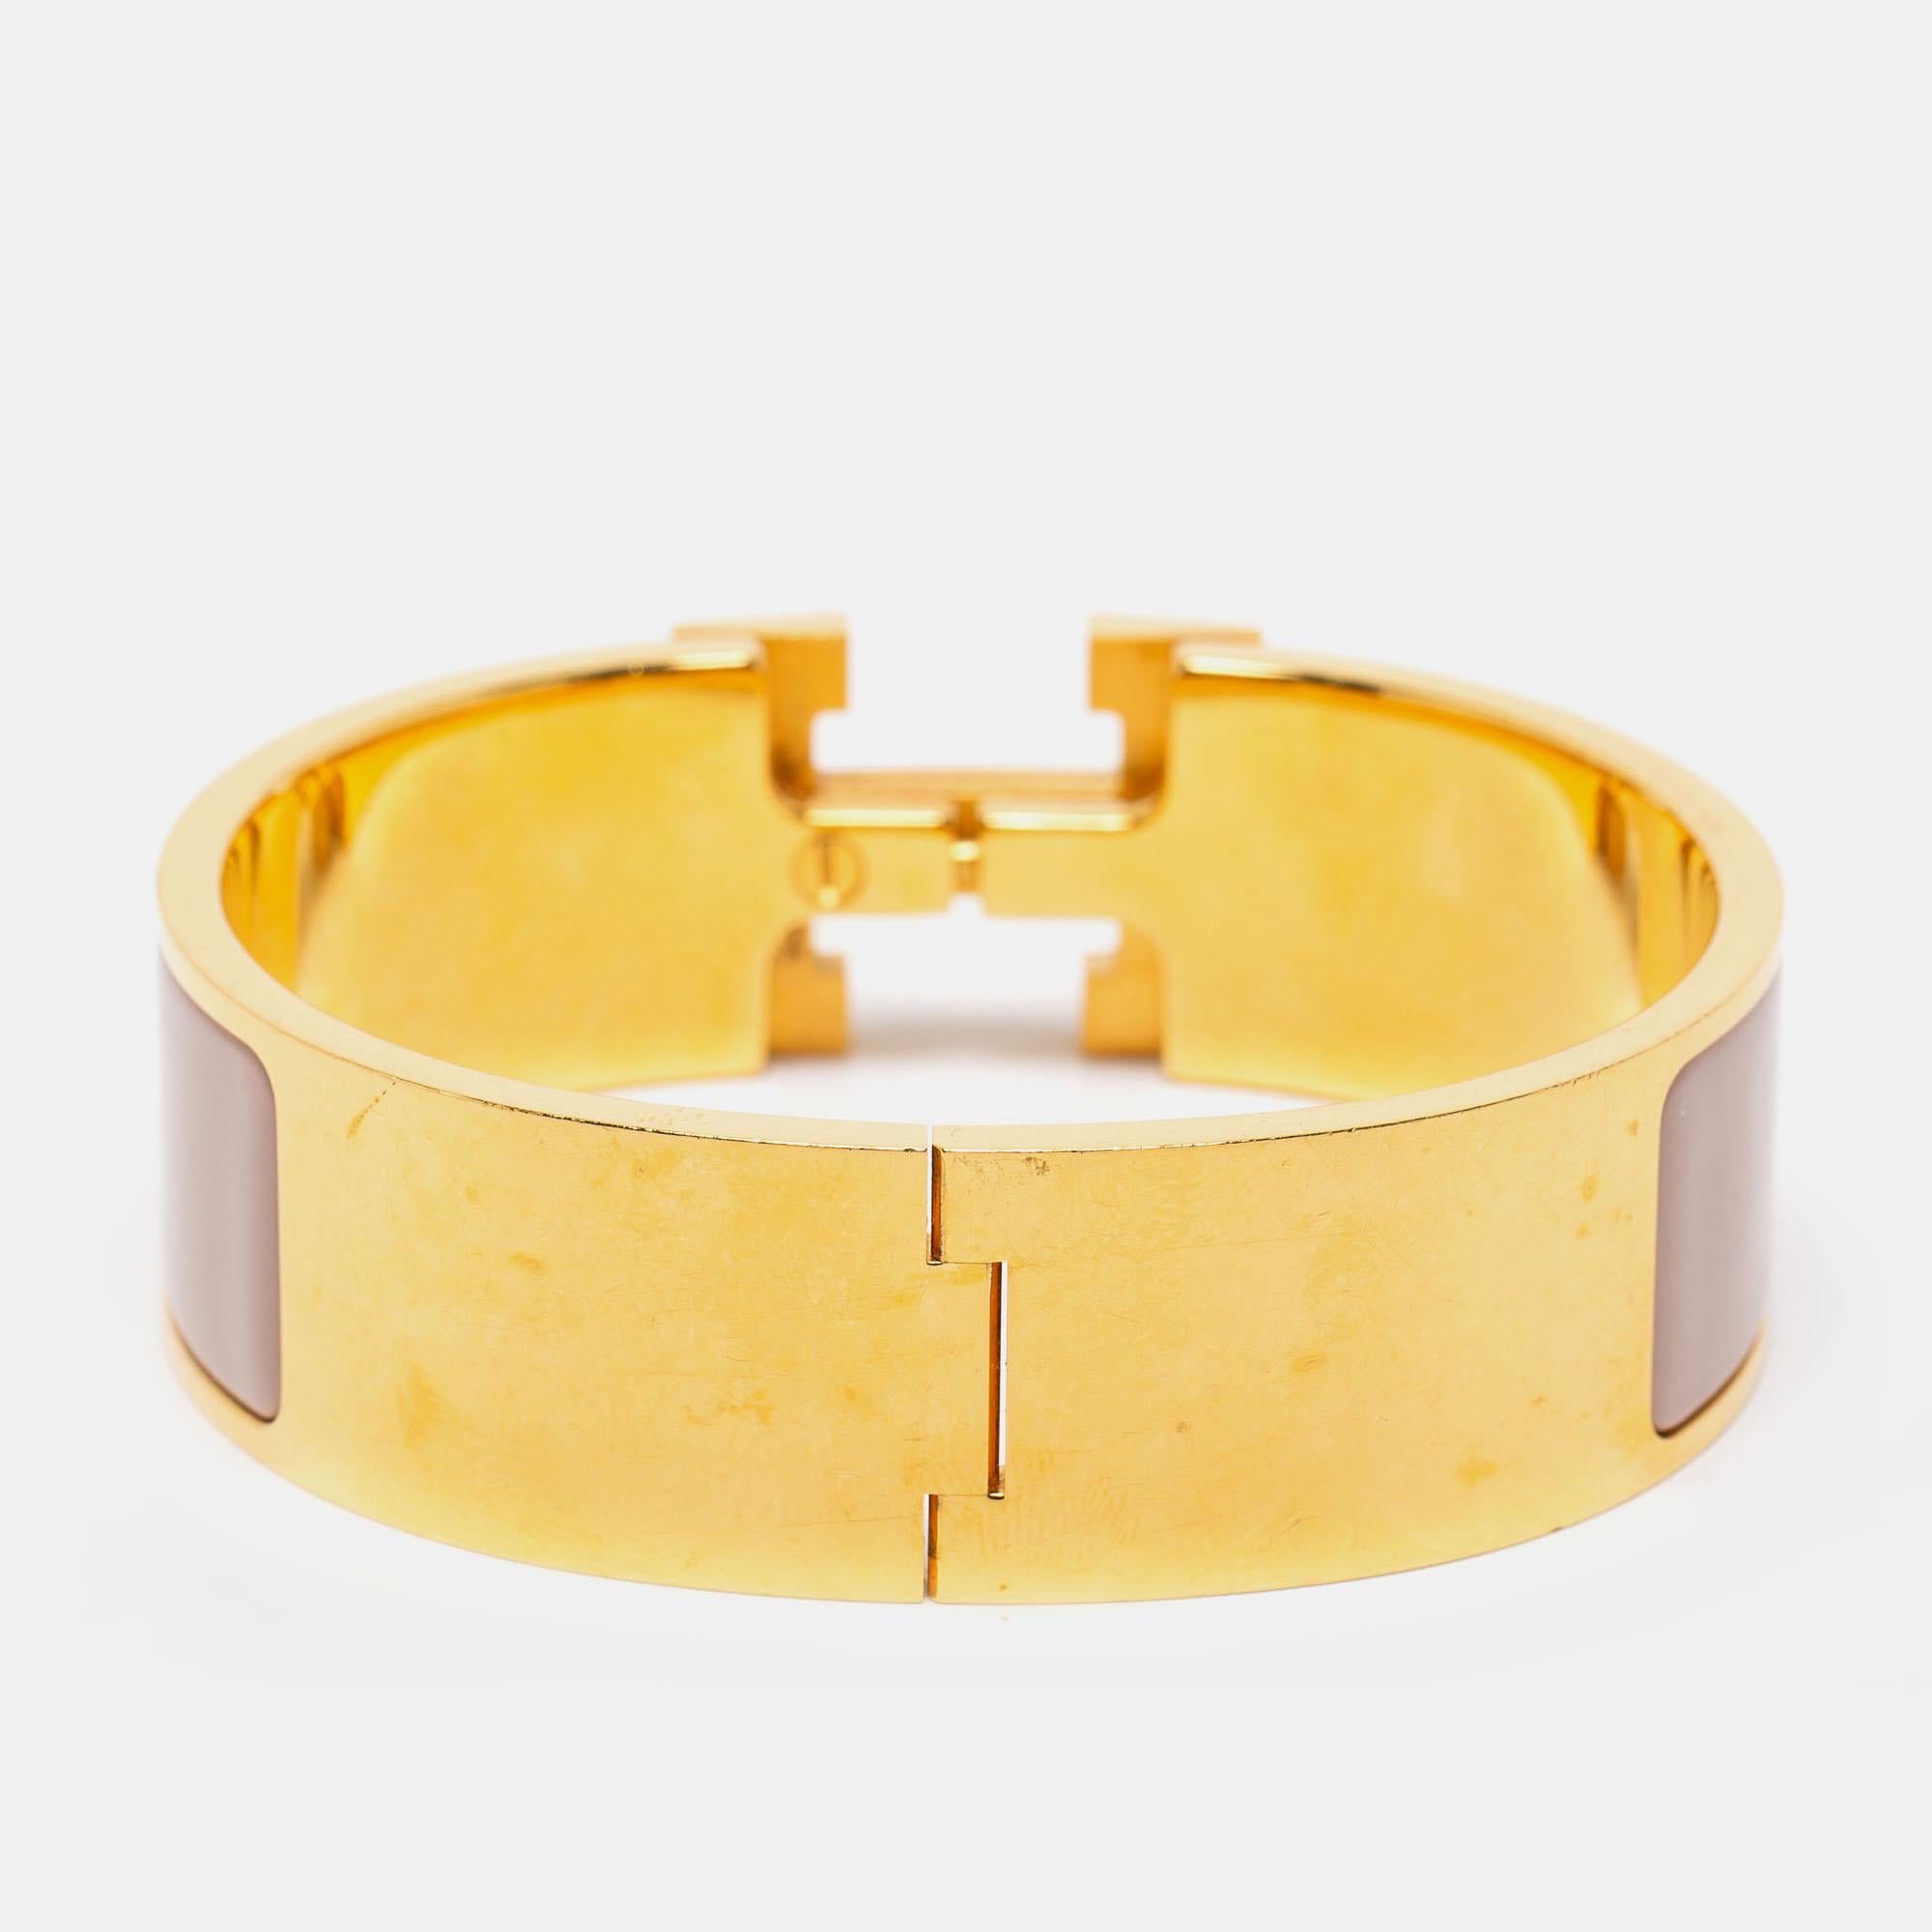 Adorn your wrist with this stunner of a bracelet from the House of Hermès. This piece comes from their beloved 'Clic Clac H' collection and has been crafted from pink enamel and gold-plated metal. This bracelet is complete with the iconic H. Get